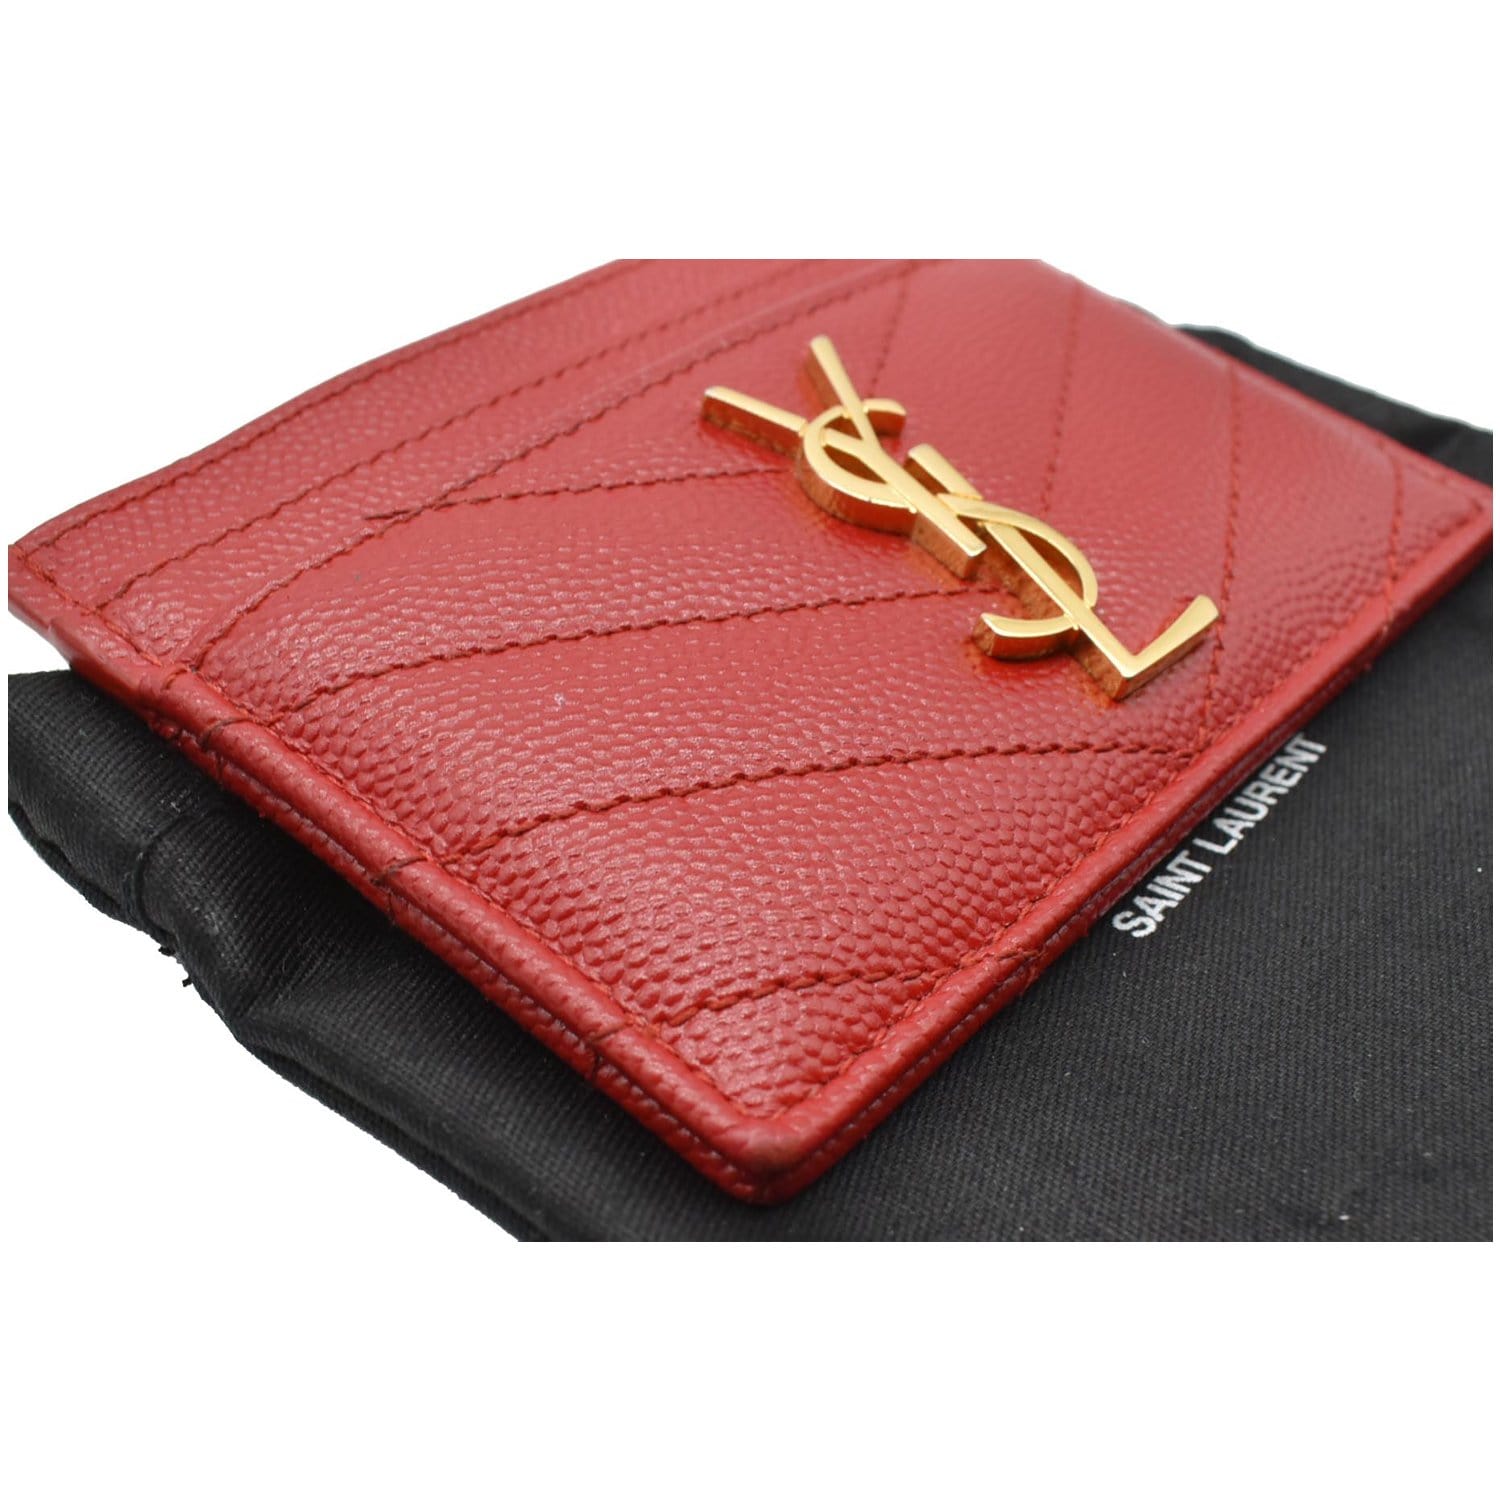 YVES SAINT LAURENT passport case Red leather Rare Monogram from japan used